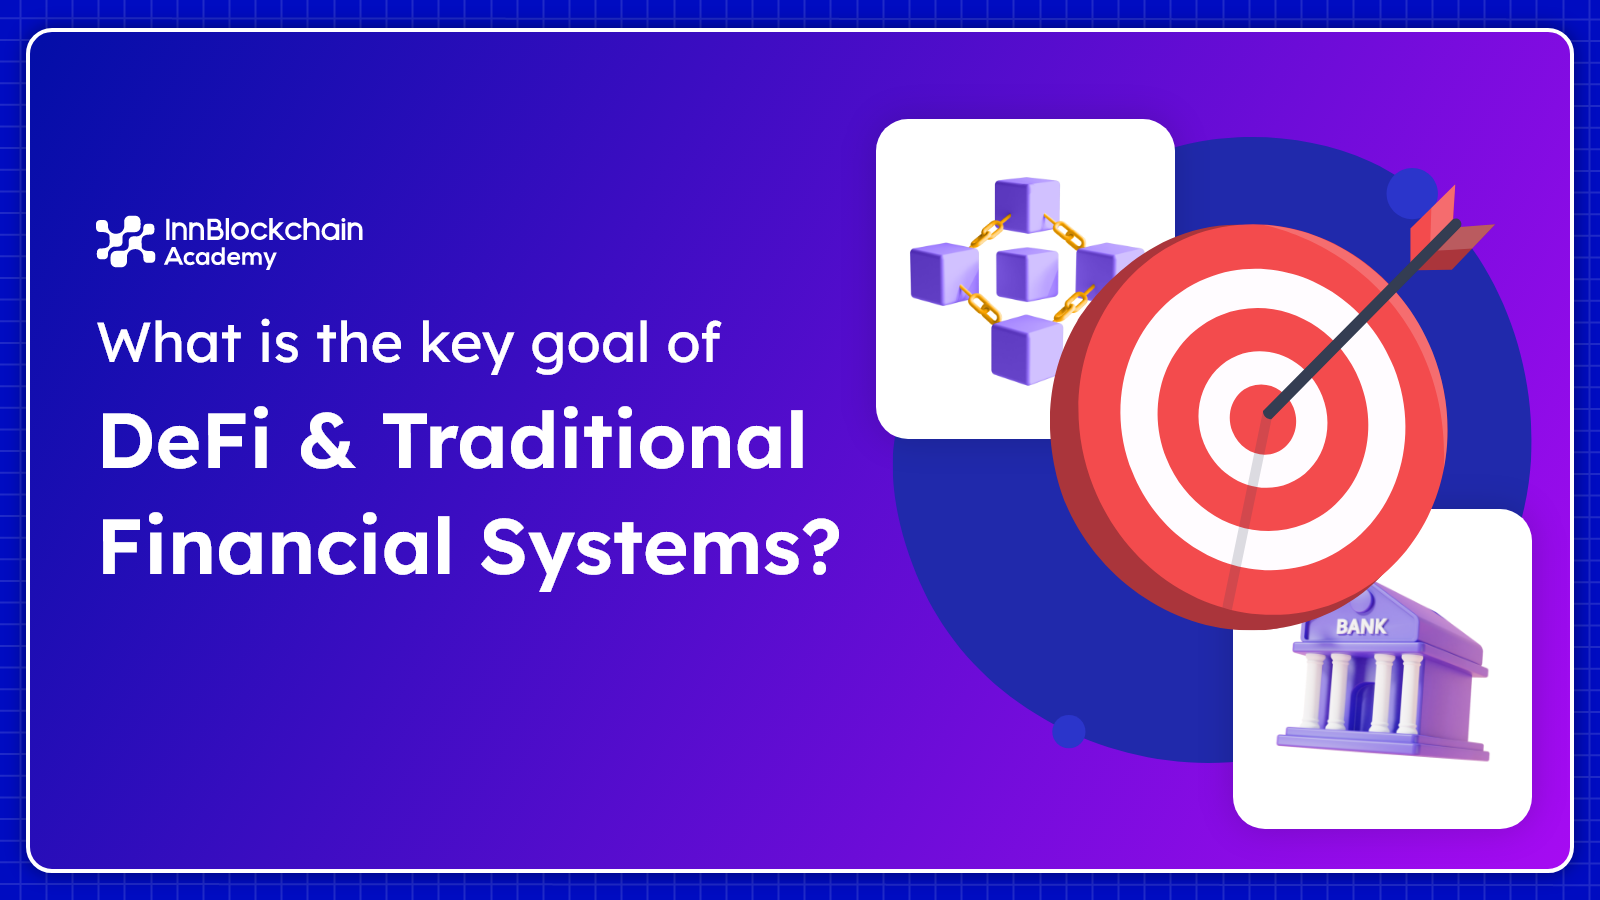 What is the key goal of DeFi & Traditional Financial systems?